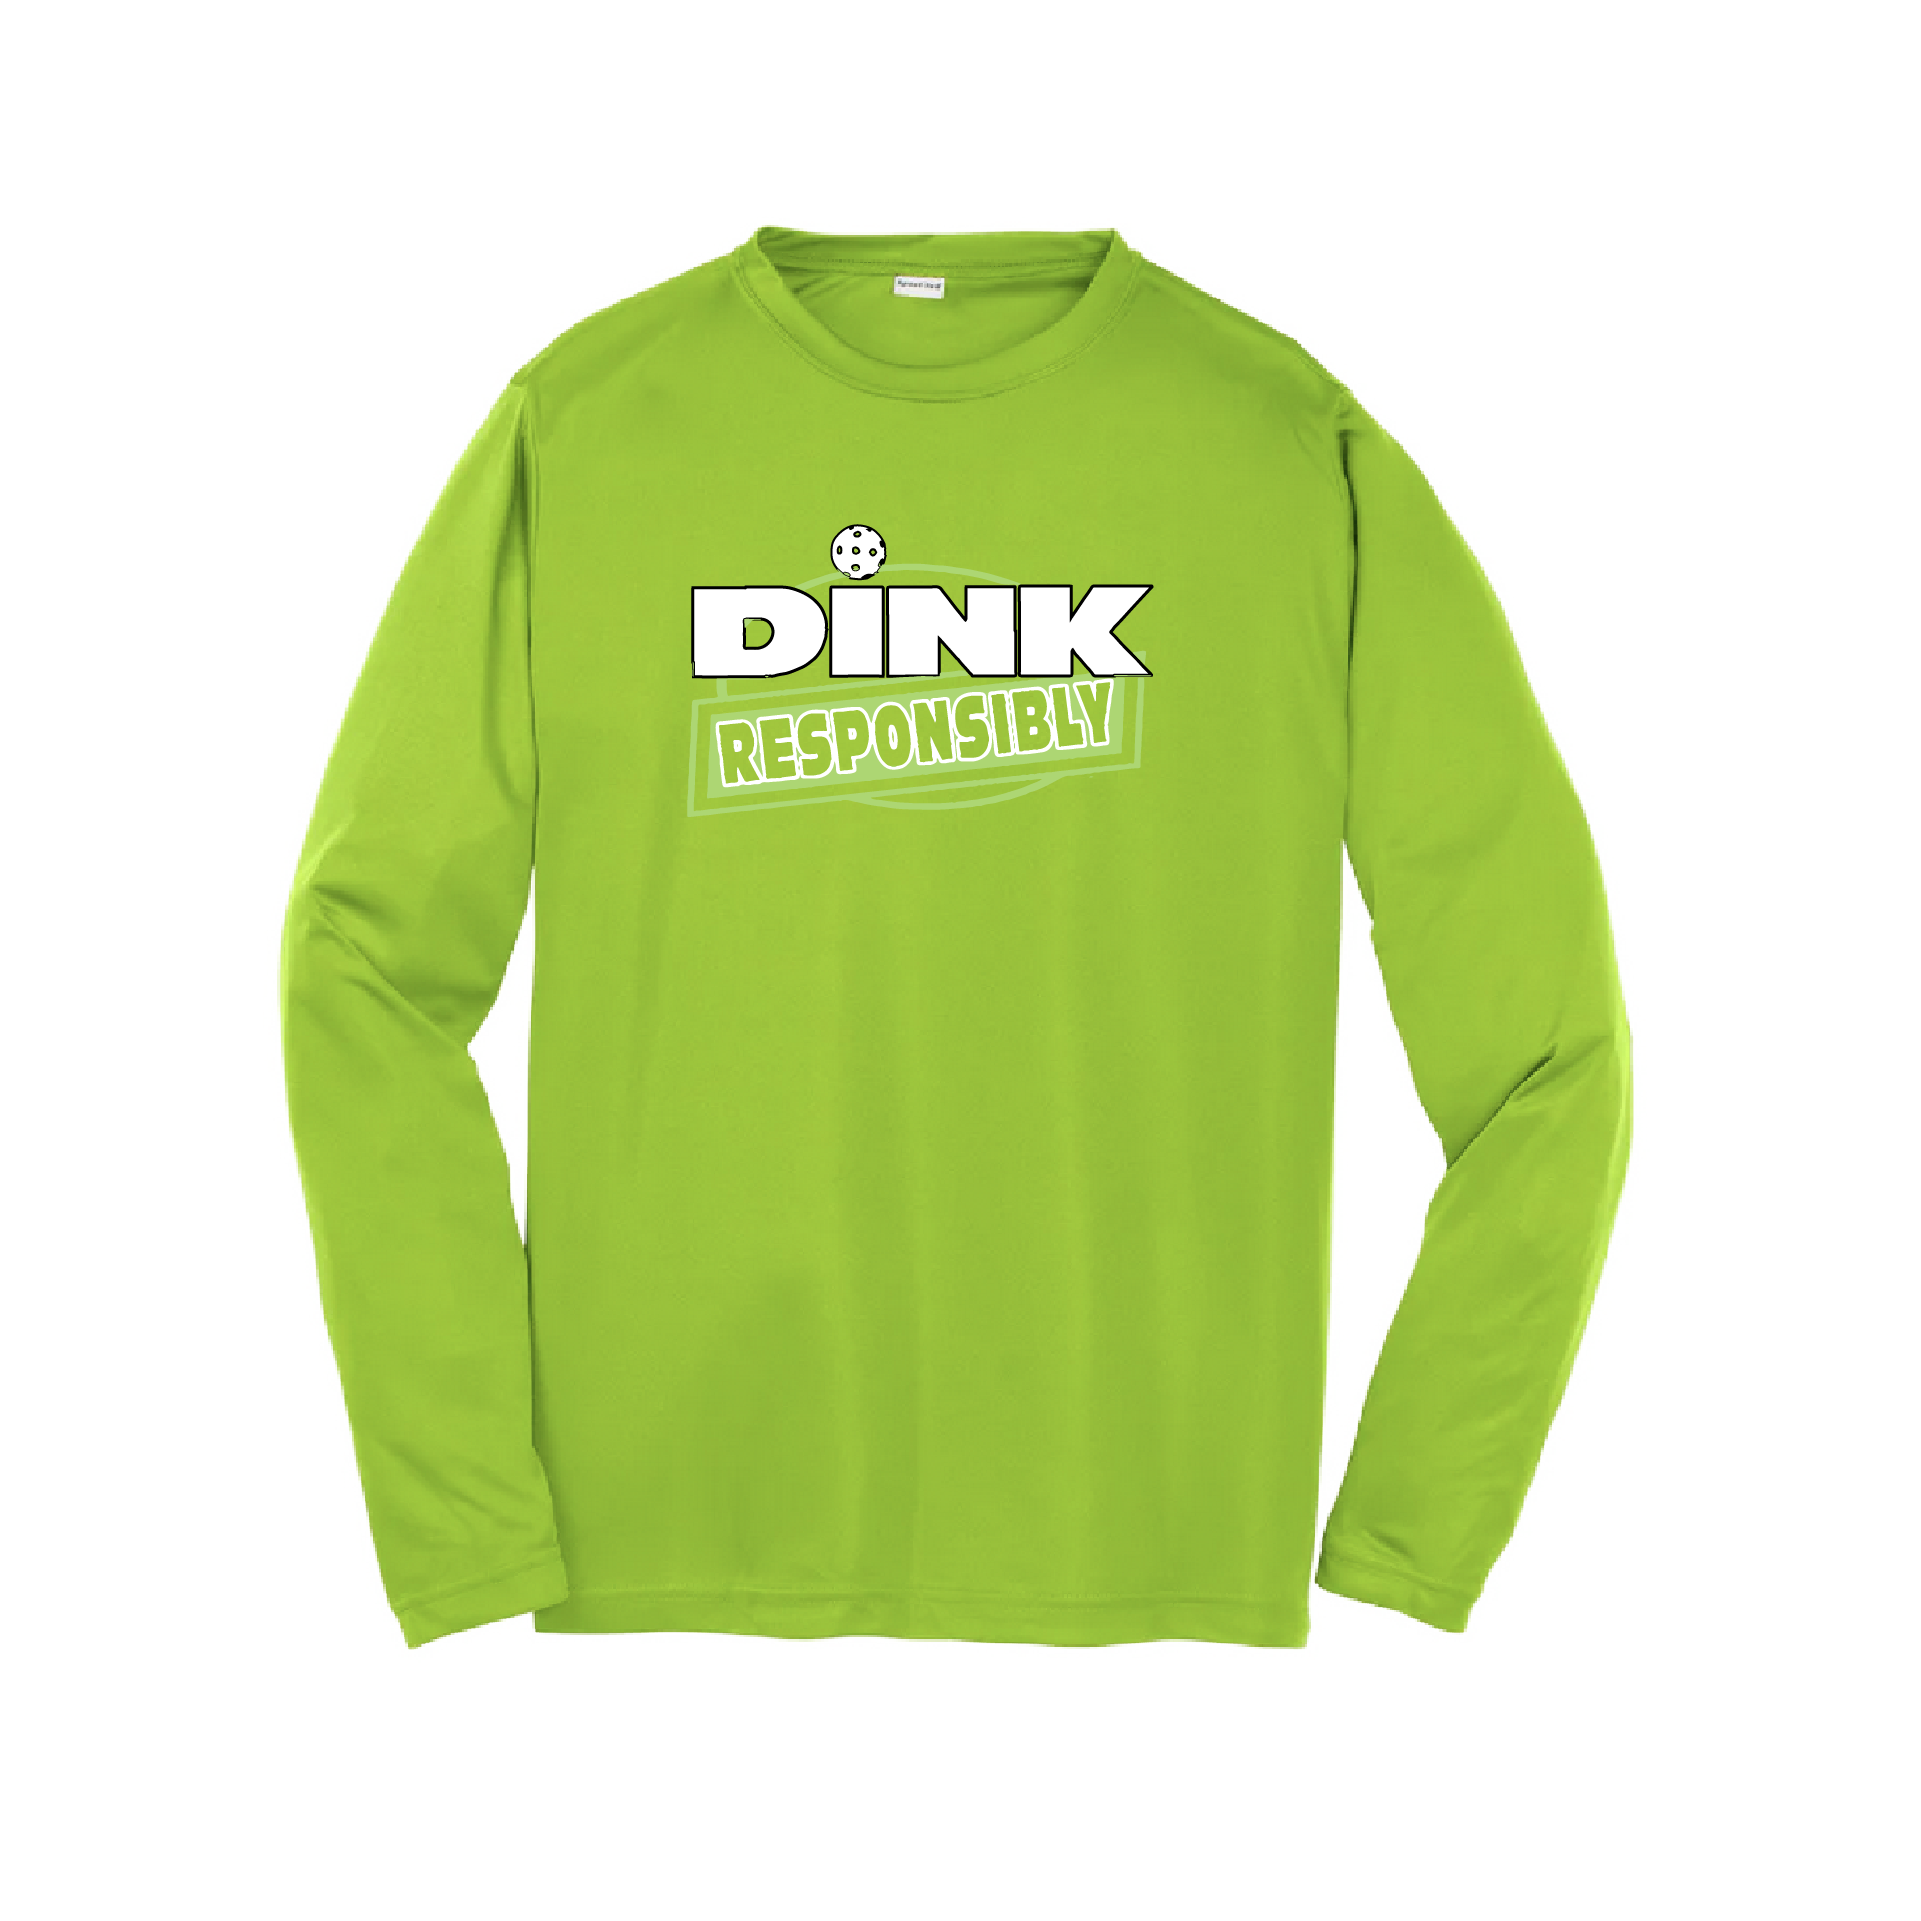 Pickleball Design: Dink Responsibly  Youth Style: Long Sleeve  Shirts are lightweight, roomy and highly breathable. These moisture-wicking shirts are designed for athletic performance. They feature PosiCharge technology to lock in color and prevent logos from fading. Removable tag and set-in sleeves for comfort.